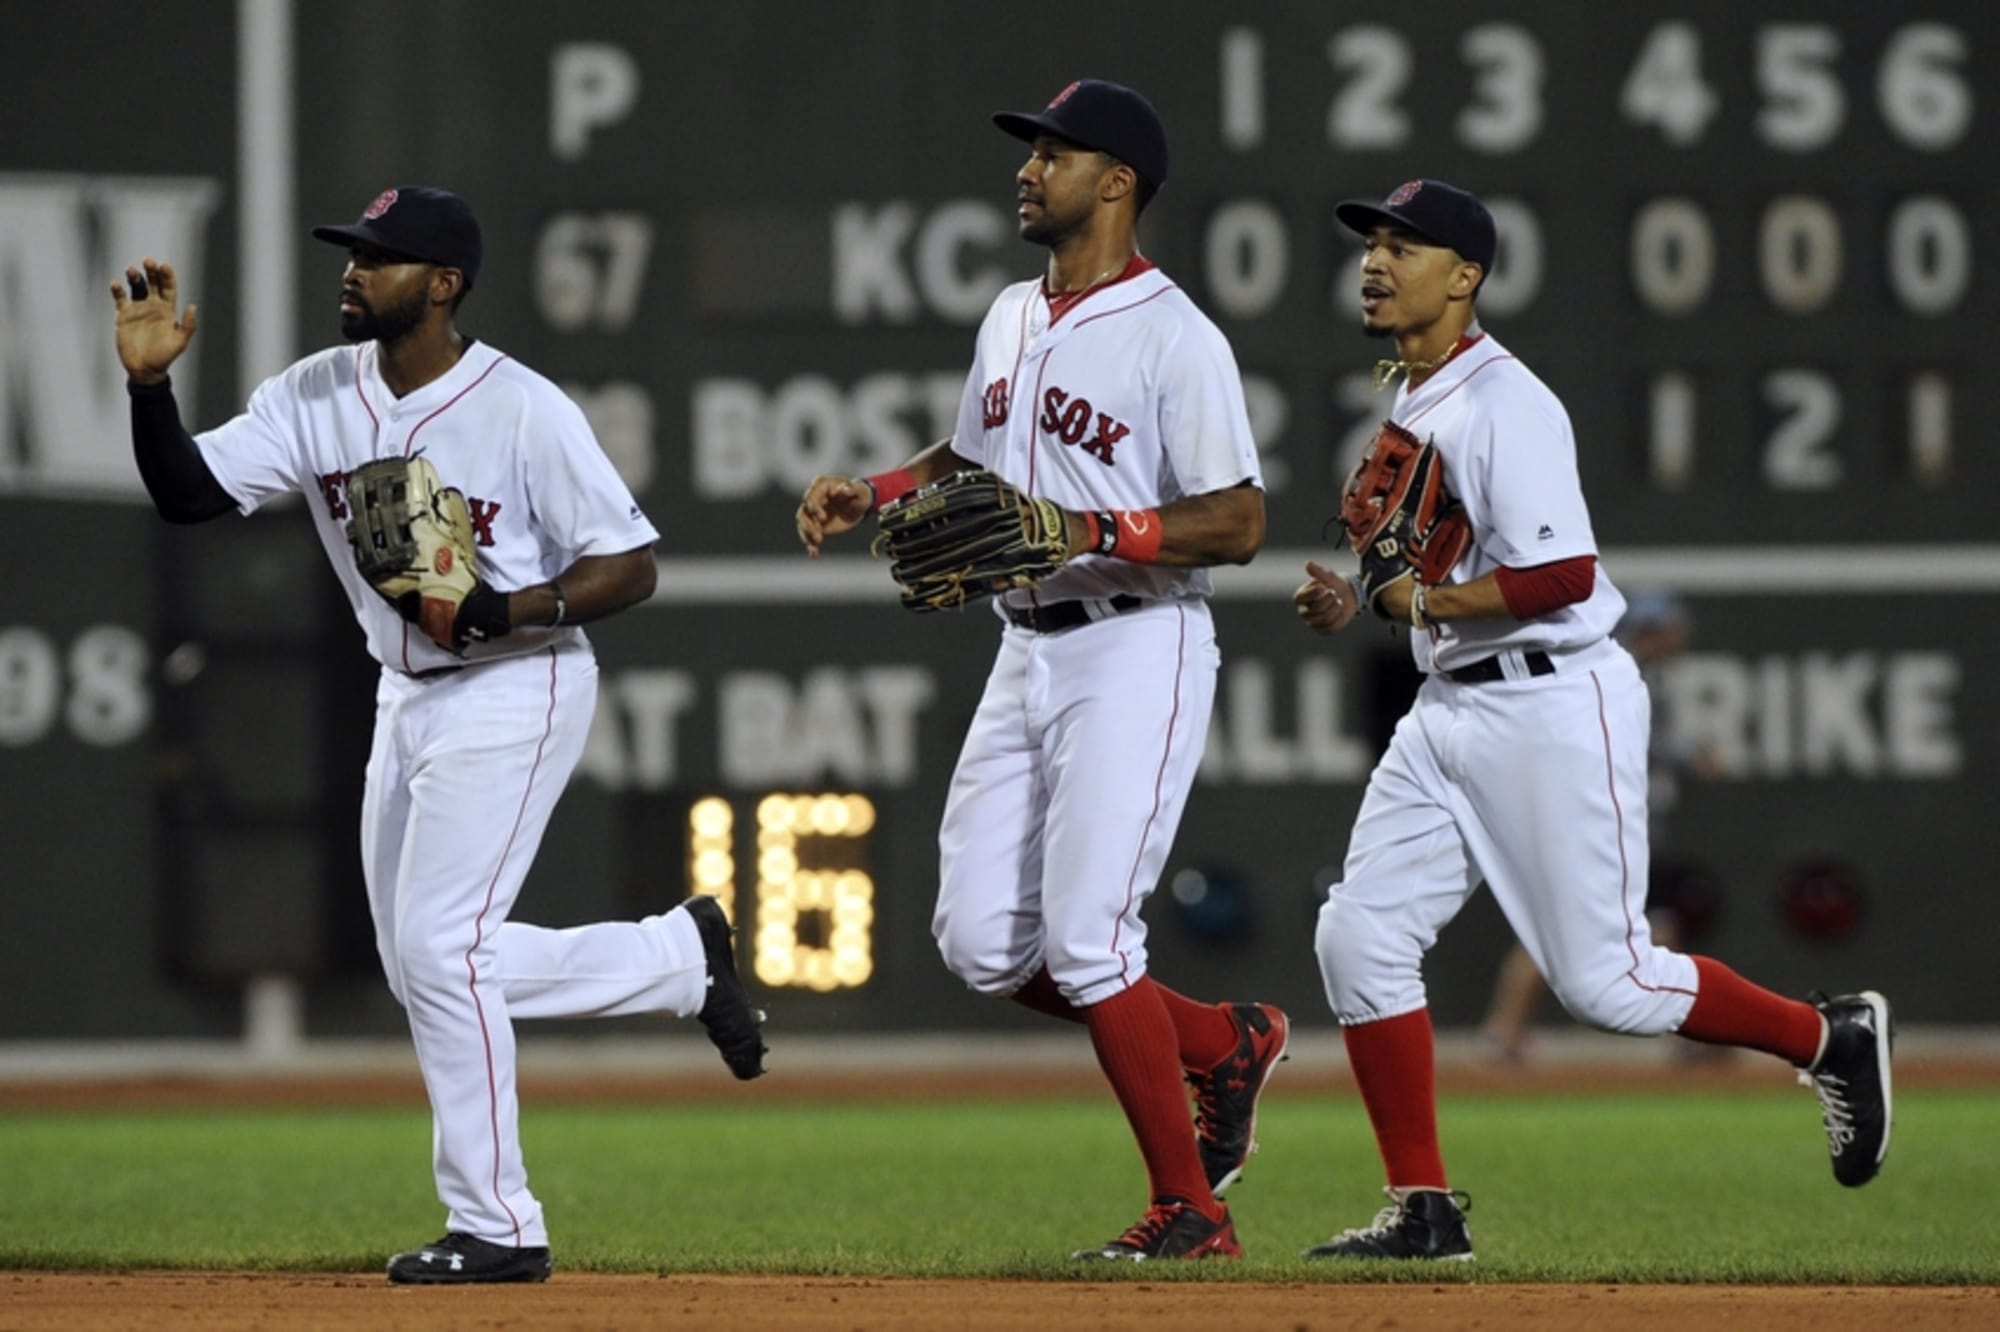 Boston Red Sox have several Gold Glove candidates